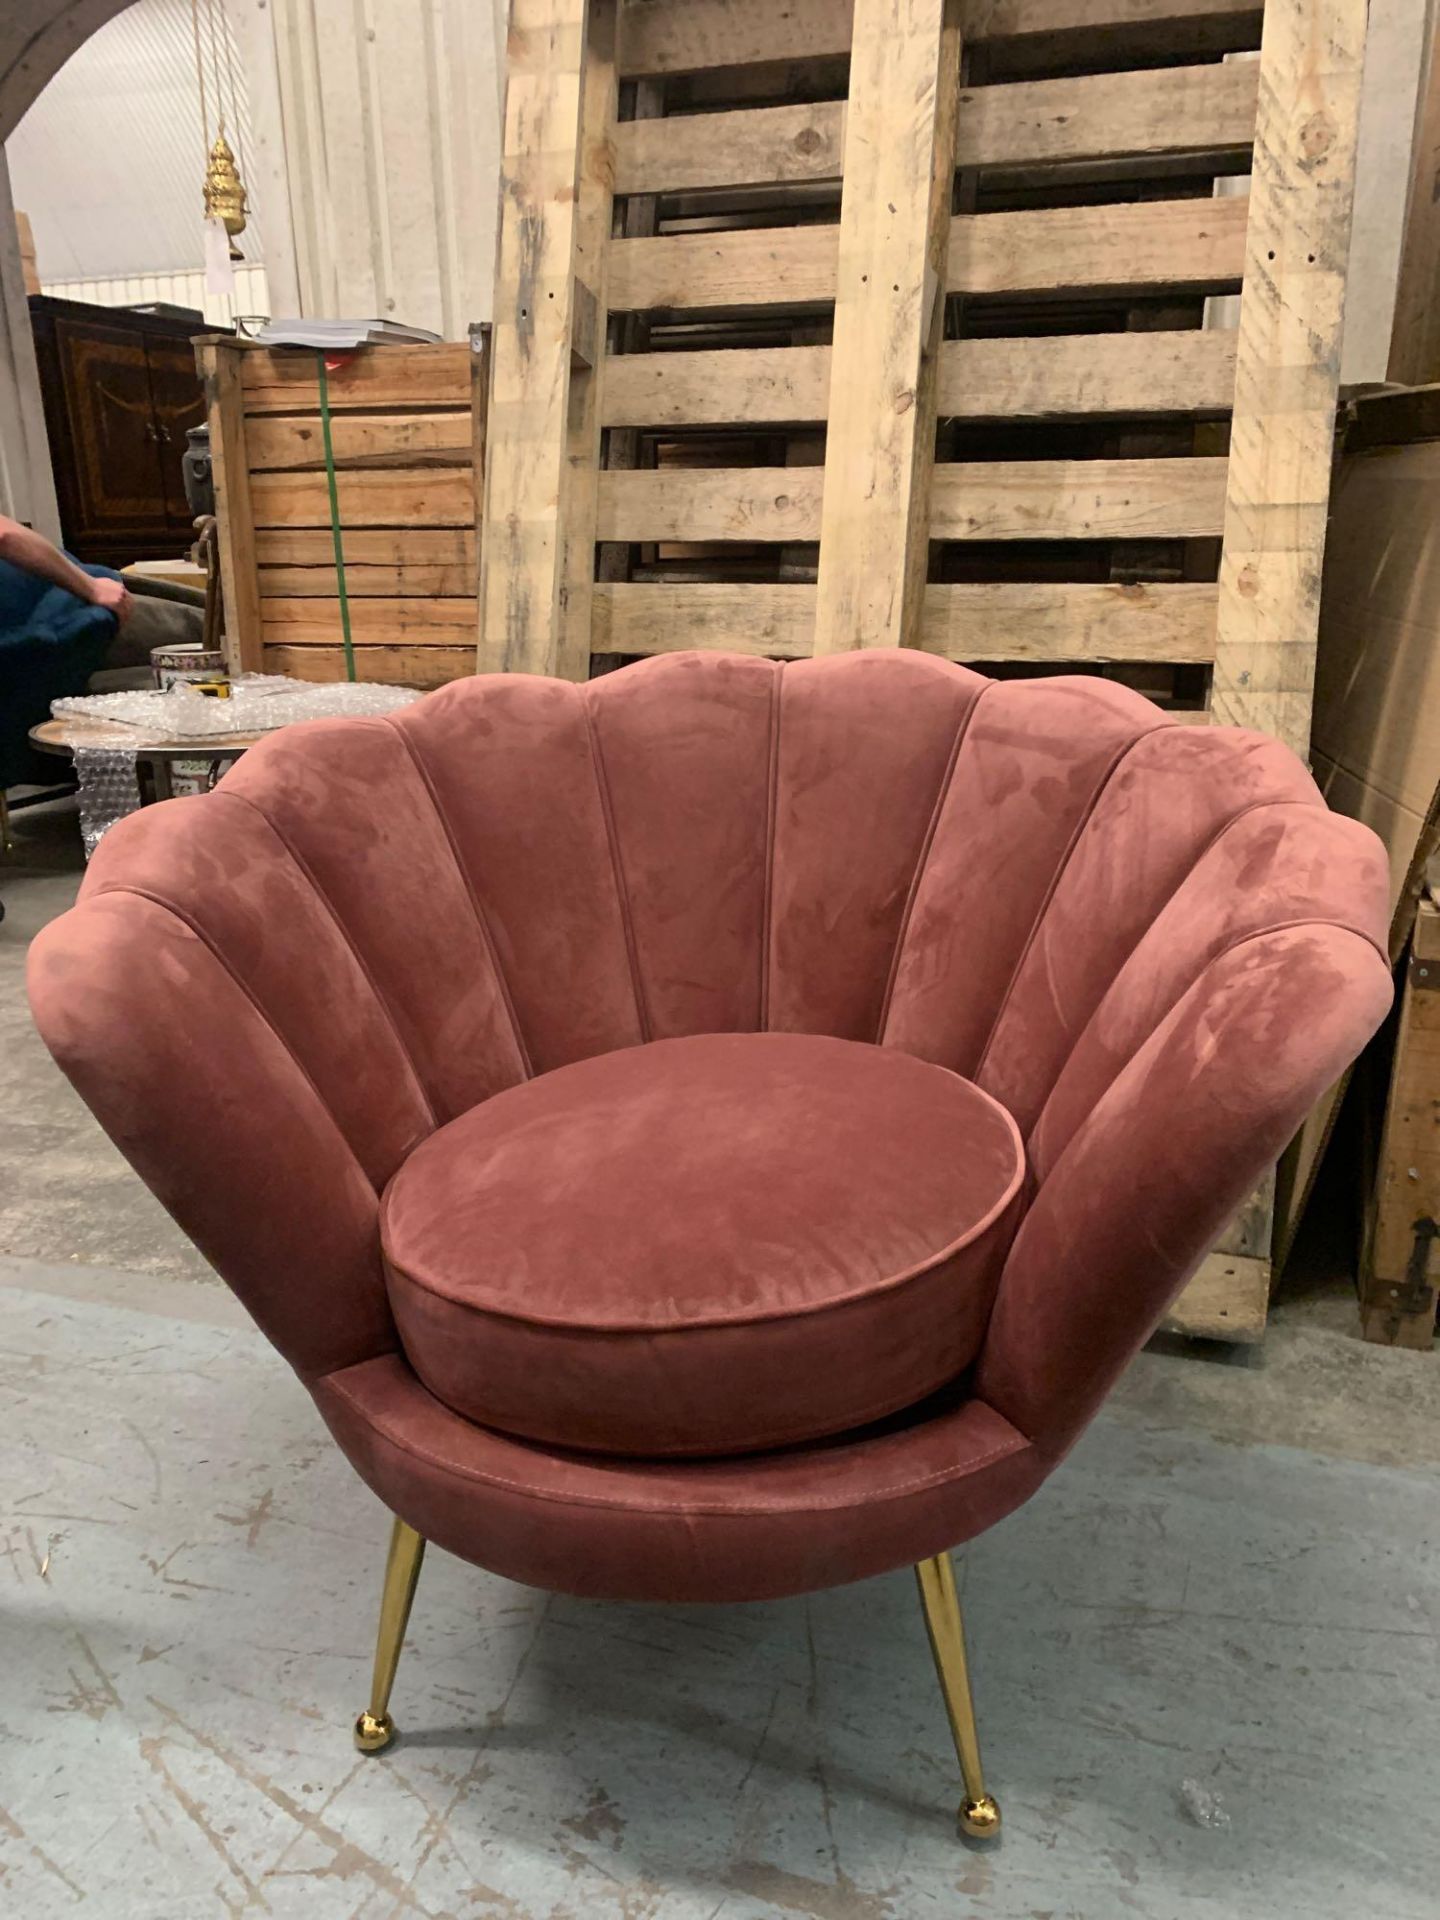 Rivello Armchair Pink W930 x D800 x H780mm - Image 4 of 4